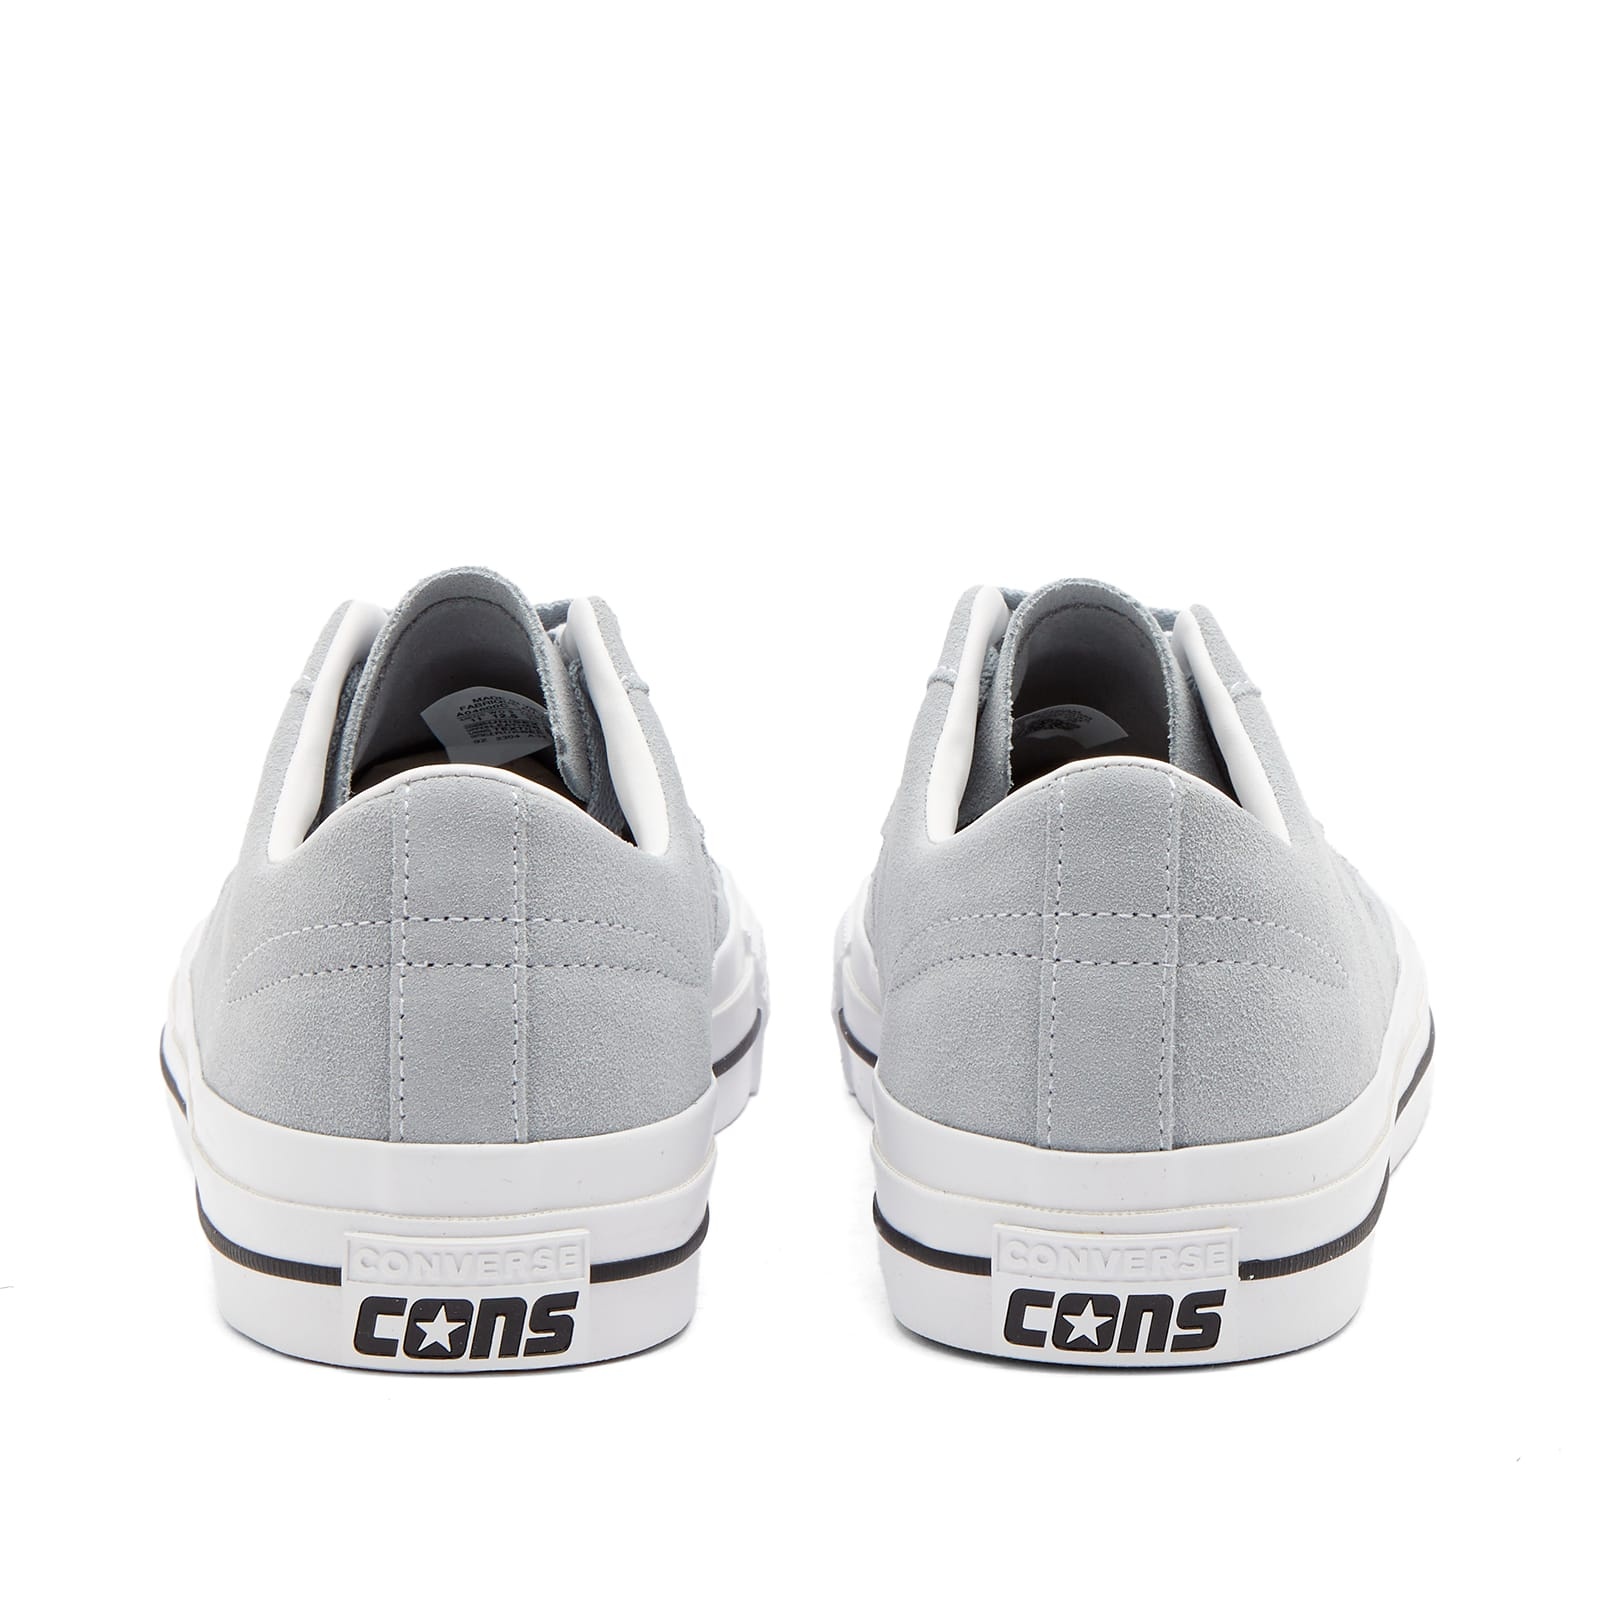 Converse Cons One Star Pro Fall Tone - 3